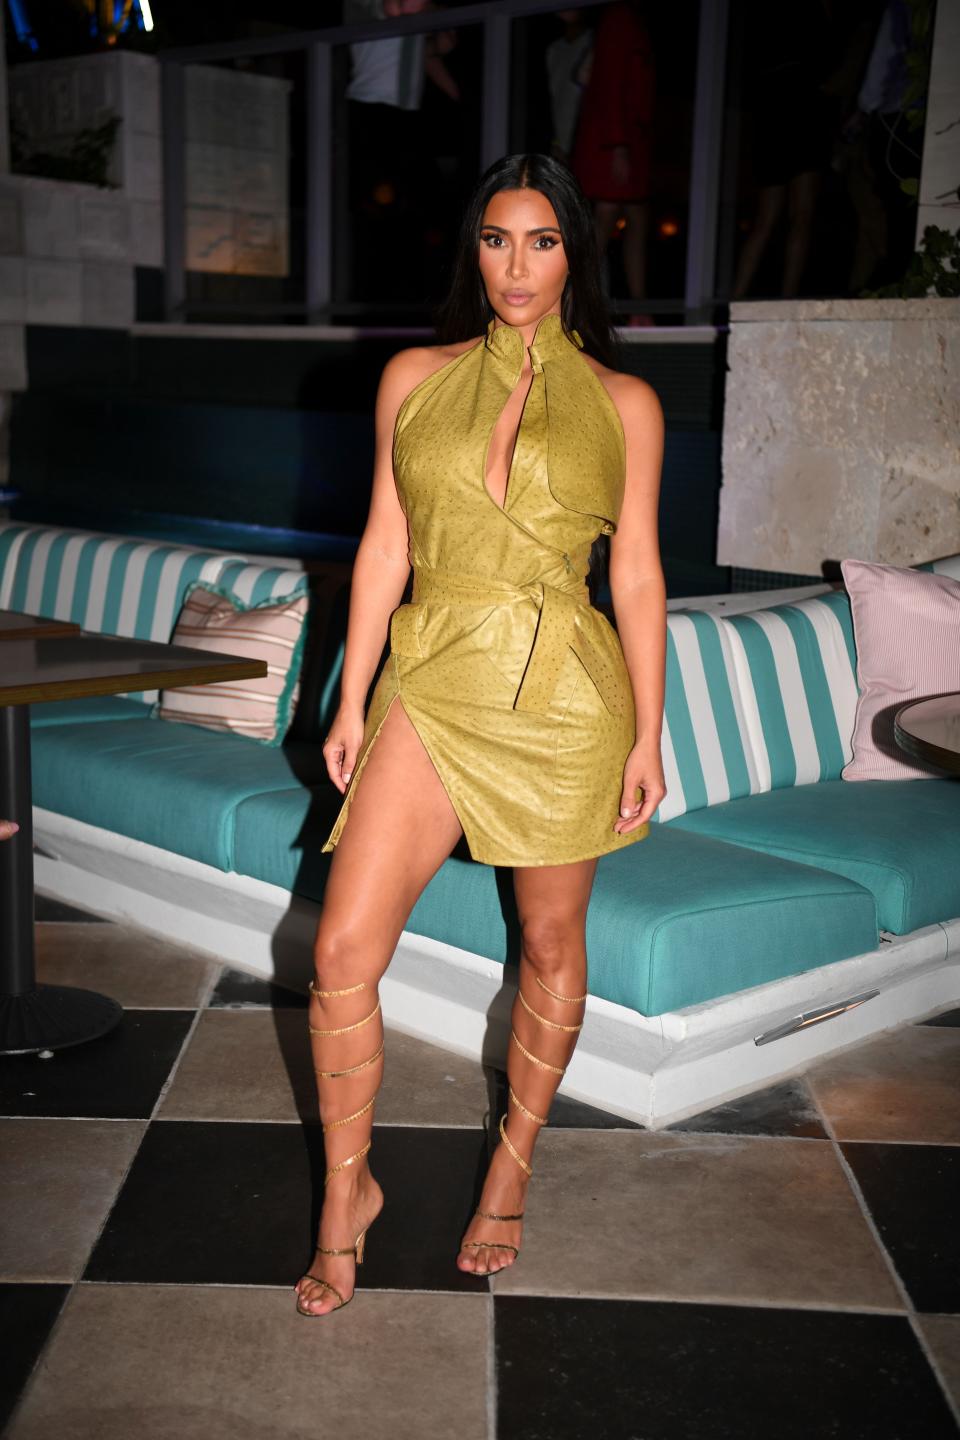 Kim Kardashian, The Beckhams, and More Attend the Opening of Pharrell Williams and David Grutman’s The Goodtime Hotel in Miami Beach